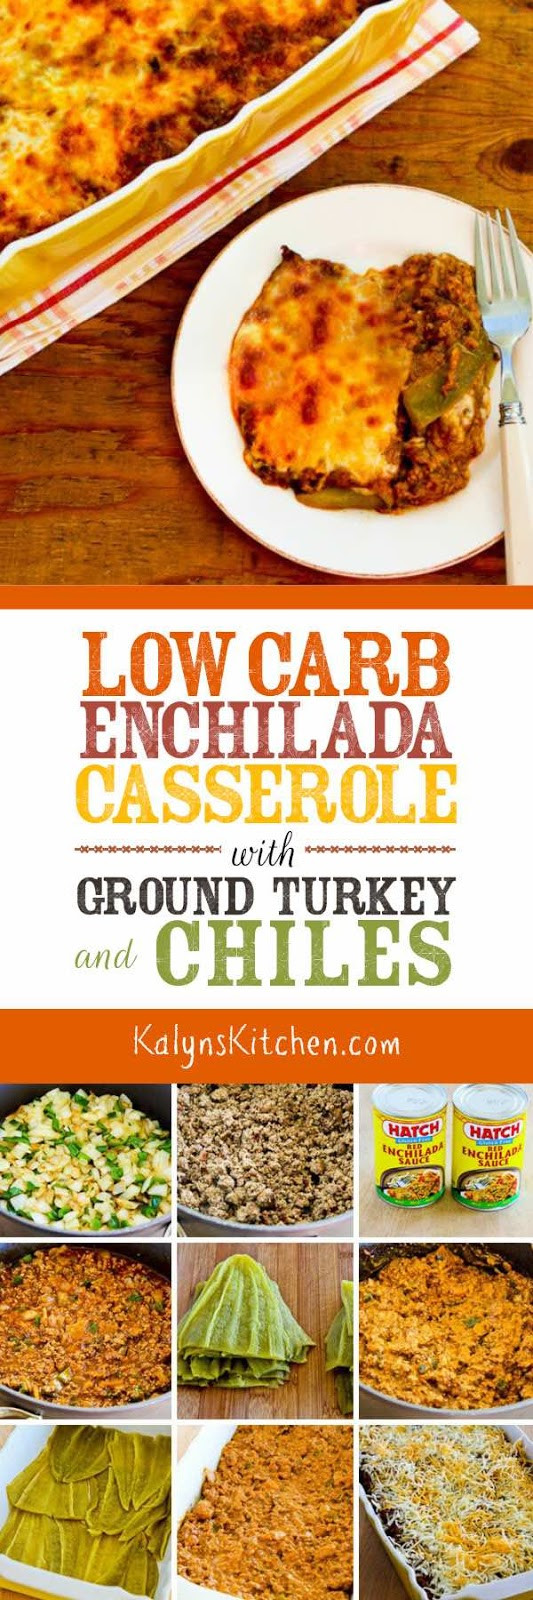 Low Carb Turkey Casserole
 Low Carb Enchilada Casserole with Ground Turkey and Chiles